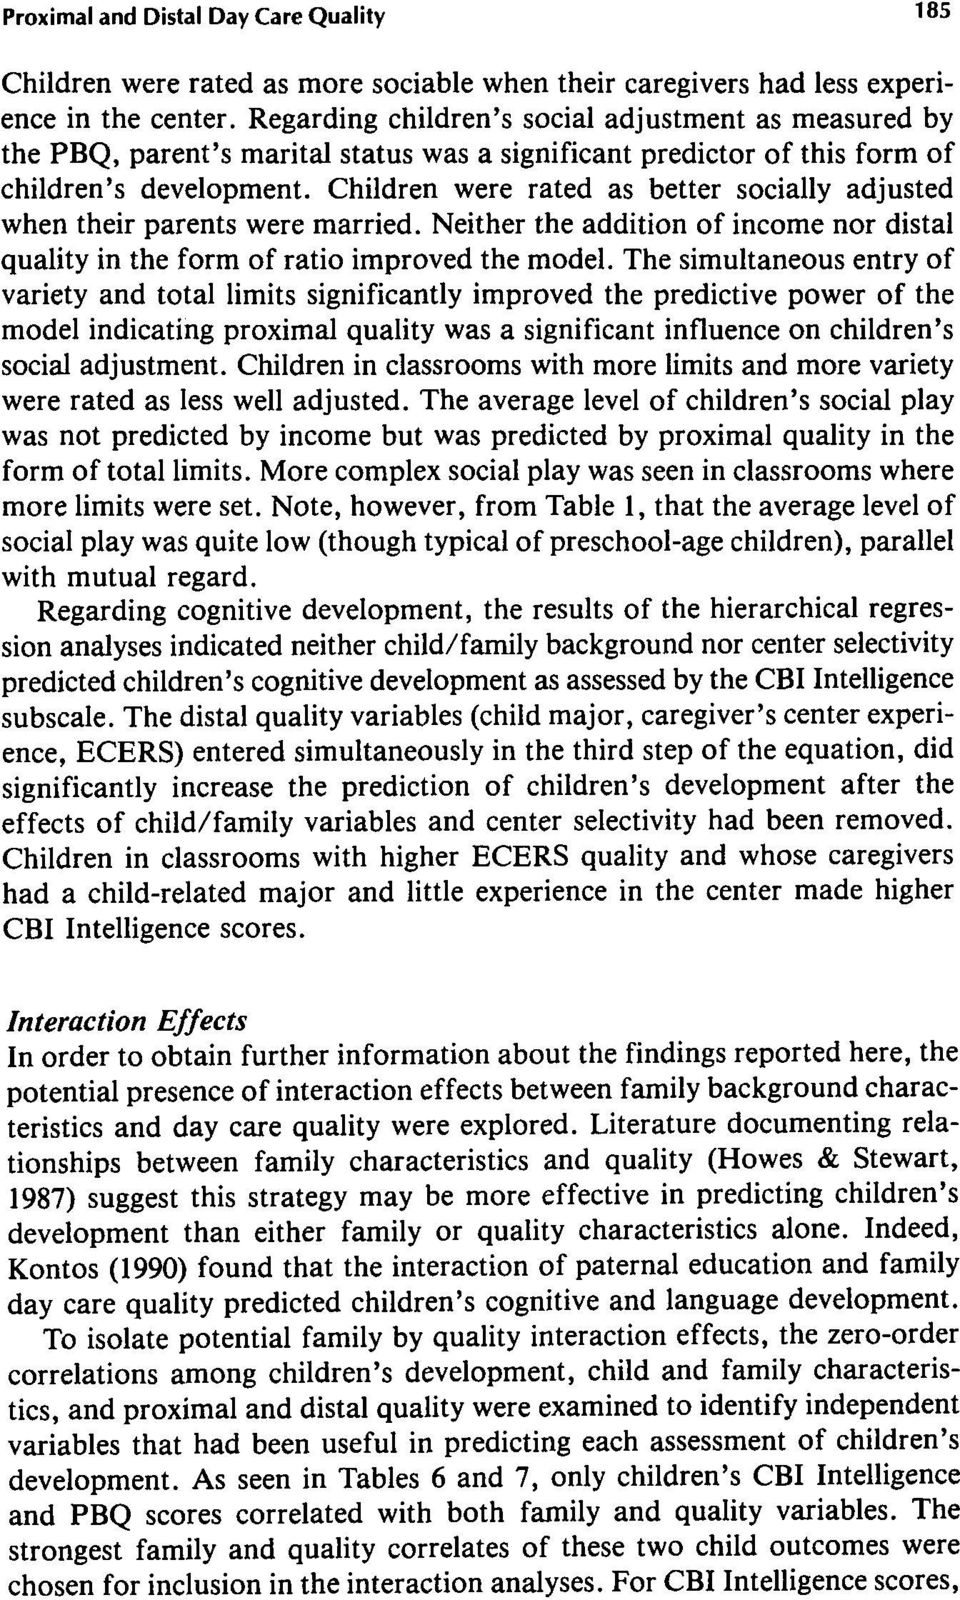 Children were rated as better socially adjusted when their parents were married. Neither the addition of income nor distal quality in the form of ratio improved the model.